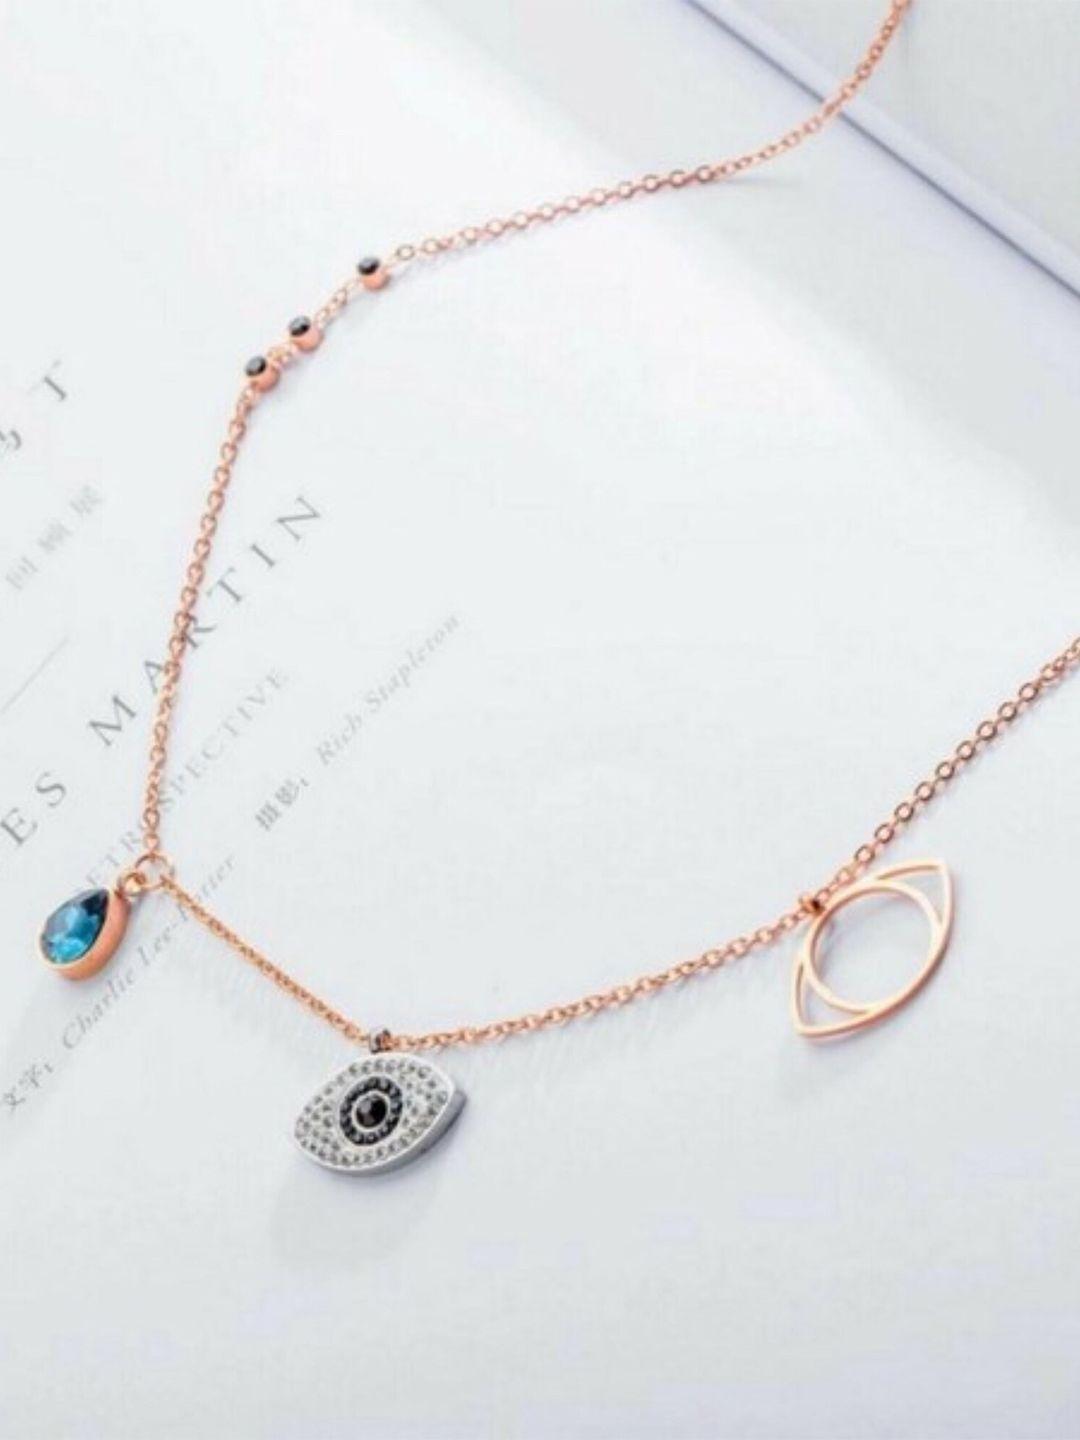 salty-stainless-steel-evil-eye-necklace